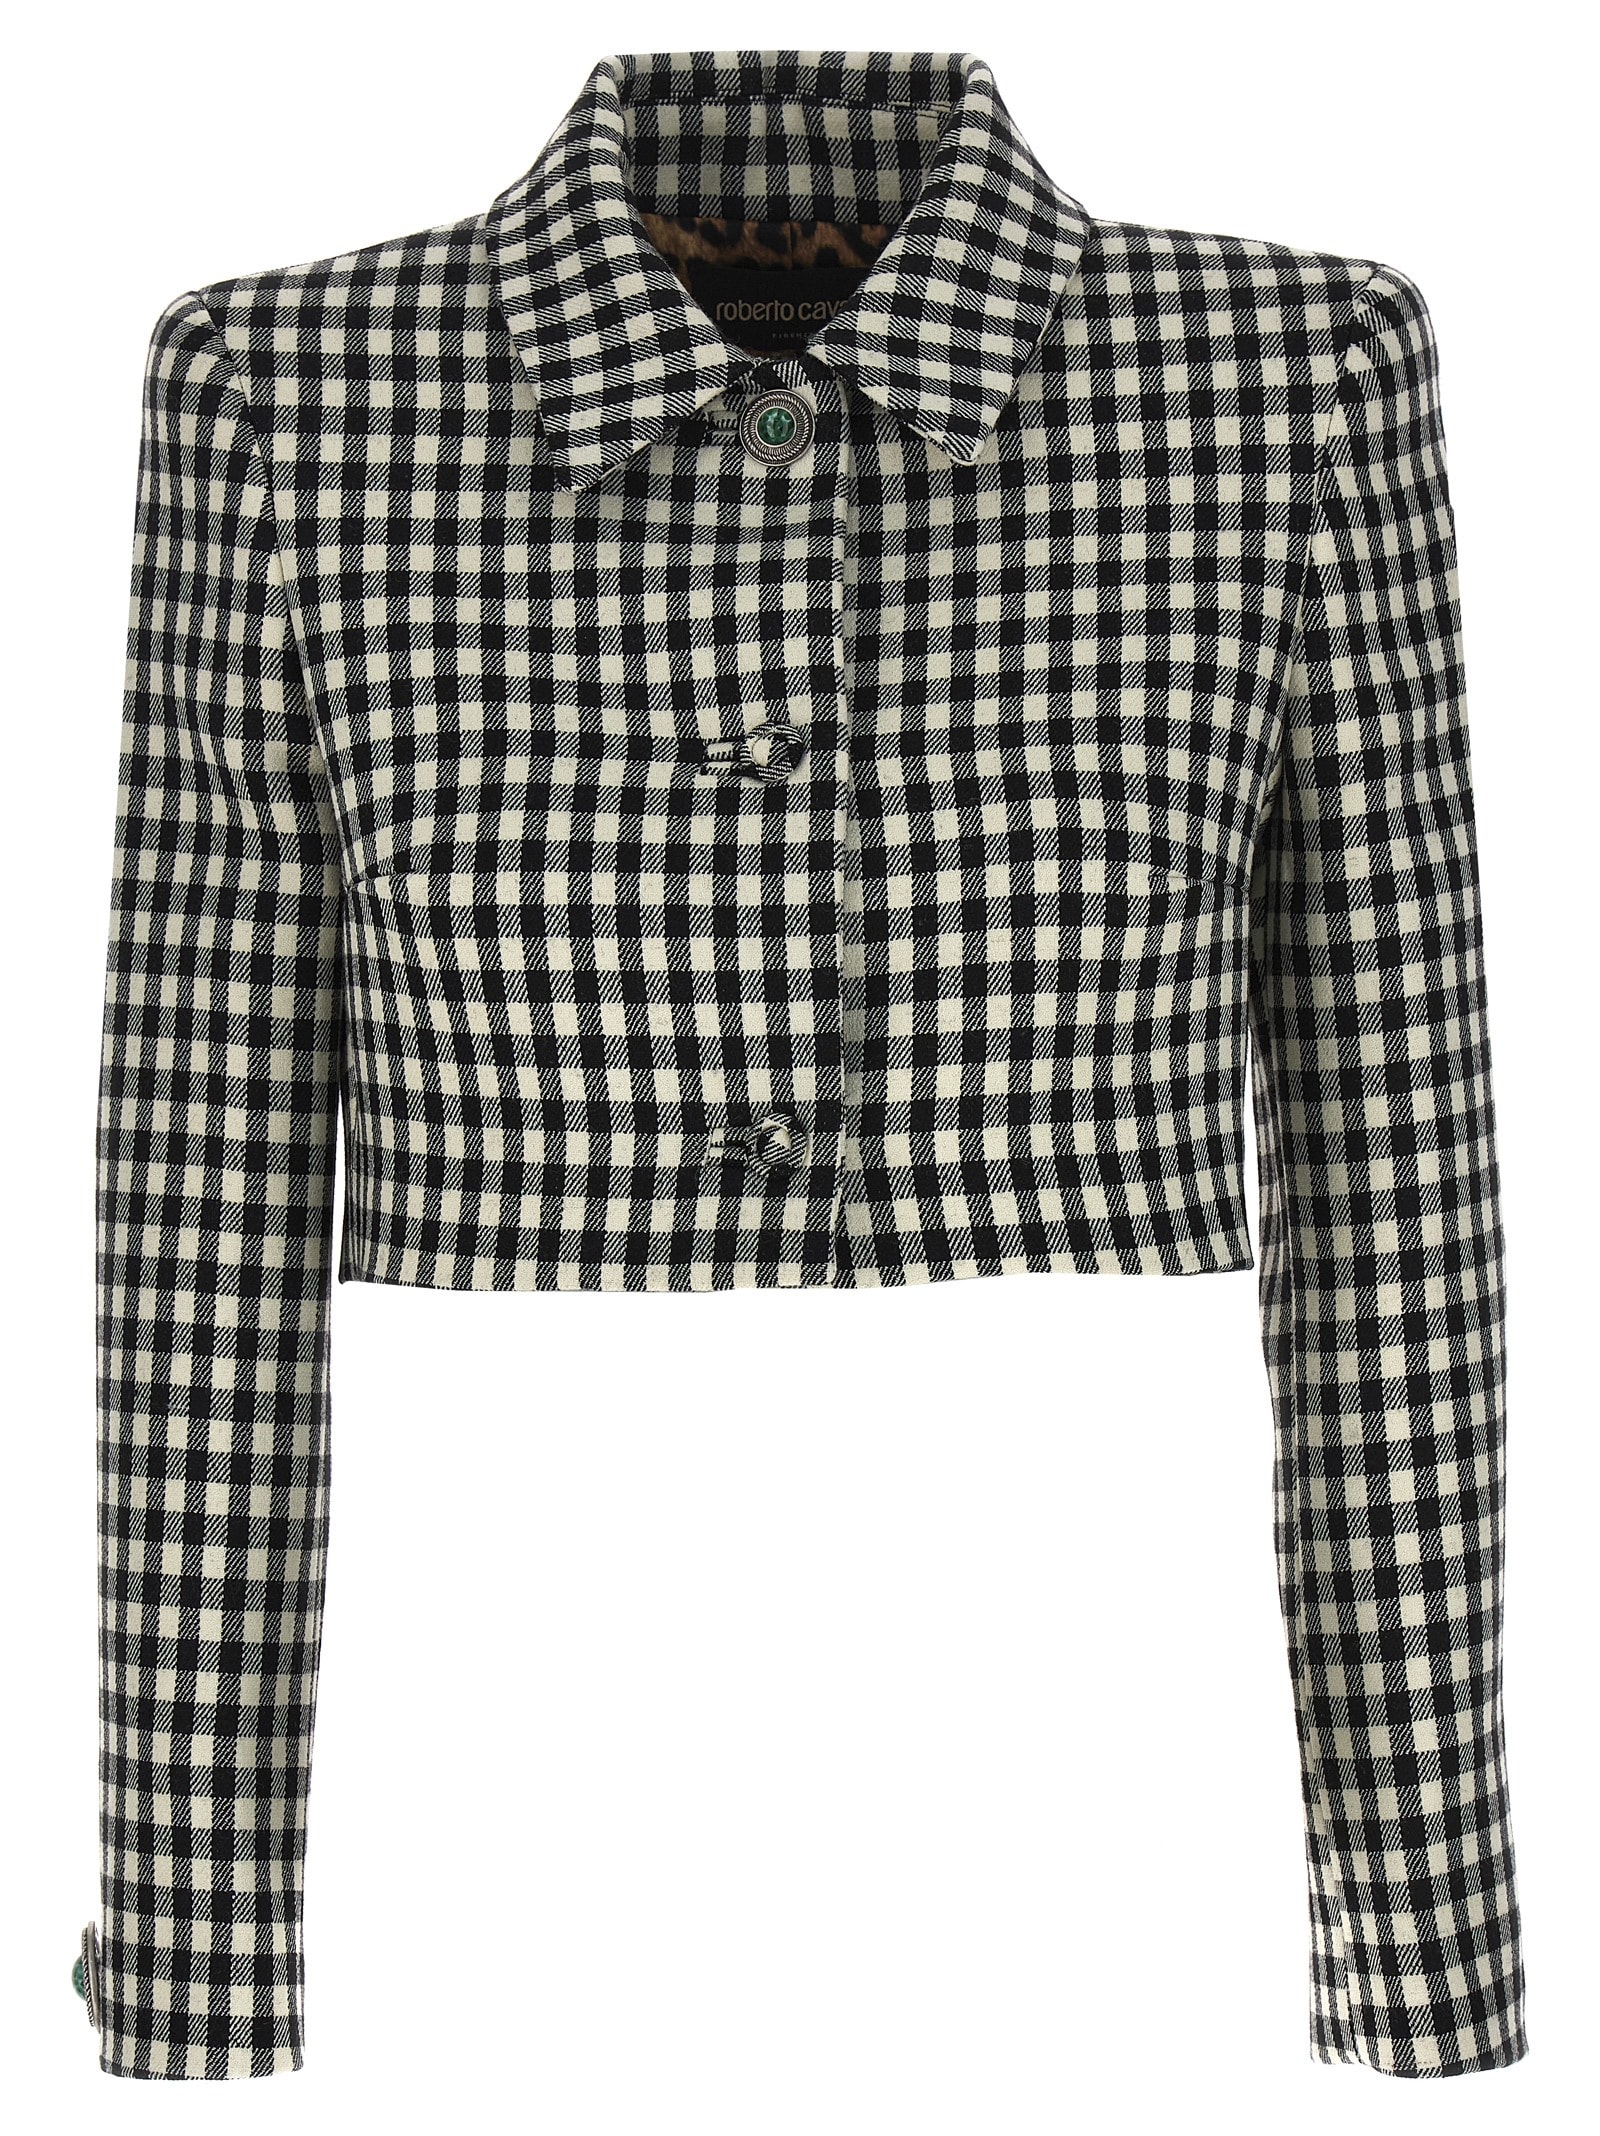 dressing gownRTO CAVALLI VICHY CROPPED JACKET